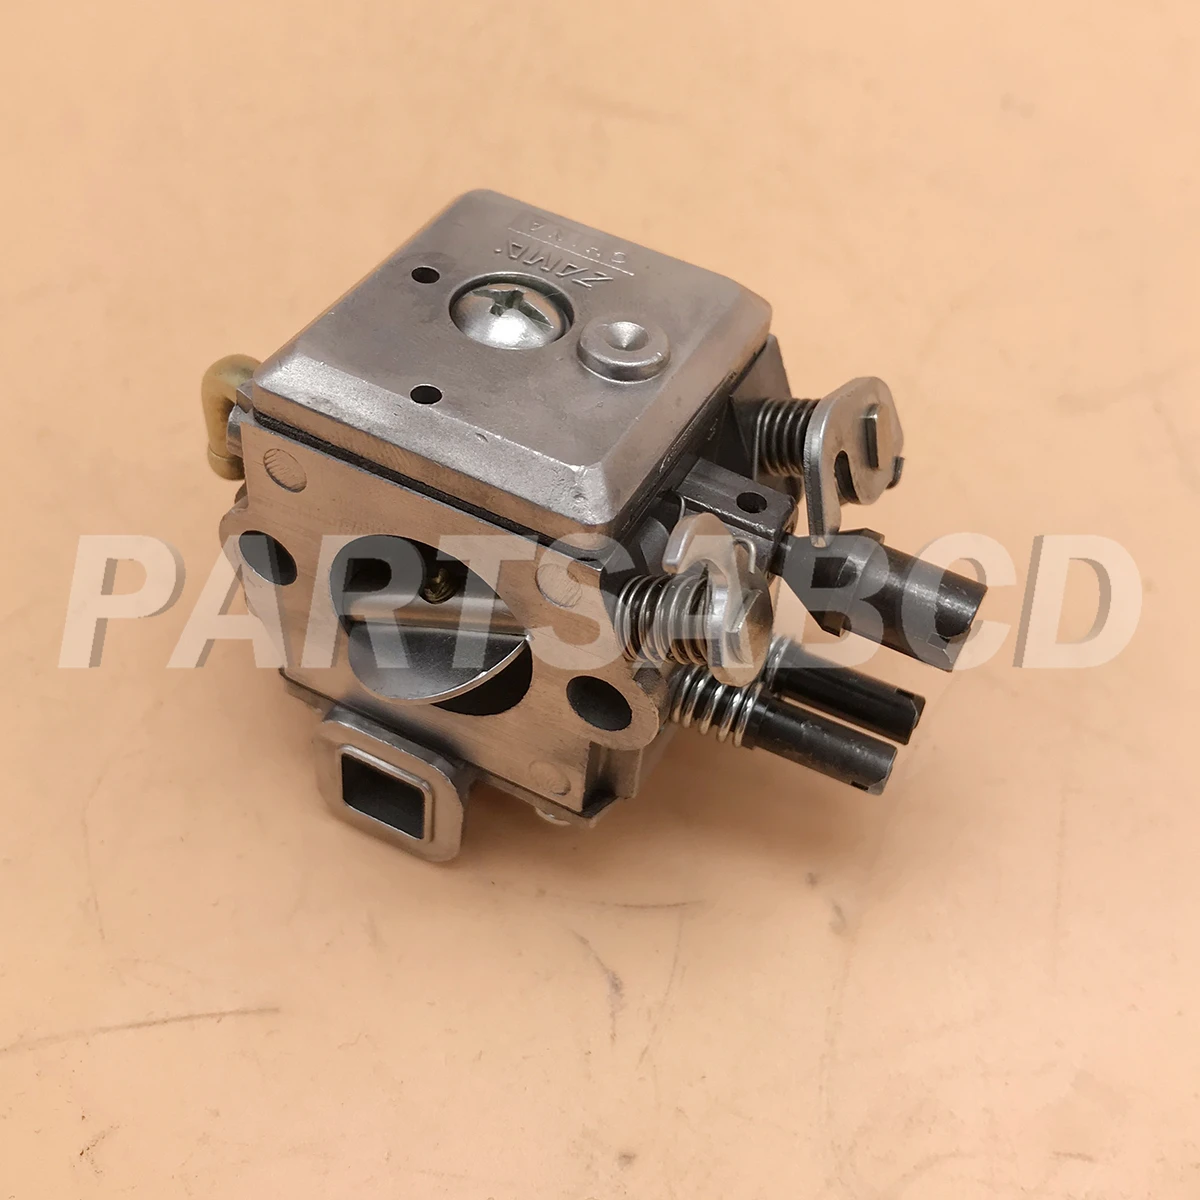 

Carburetor for Zama C3-S31 S31 for Stihl MS340 MS360 034 036 ChainSaw Carb